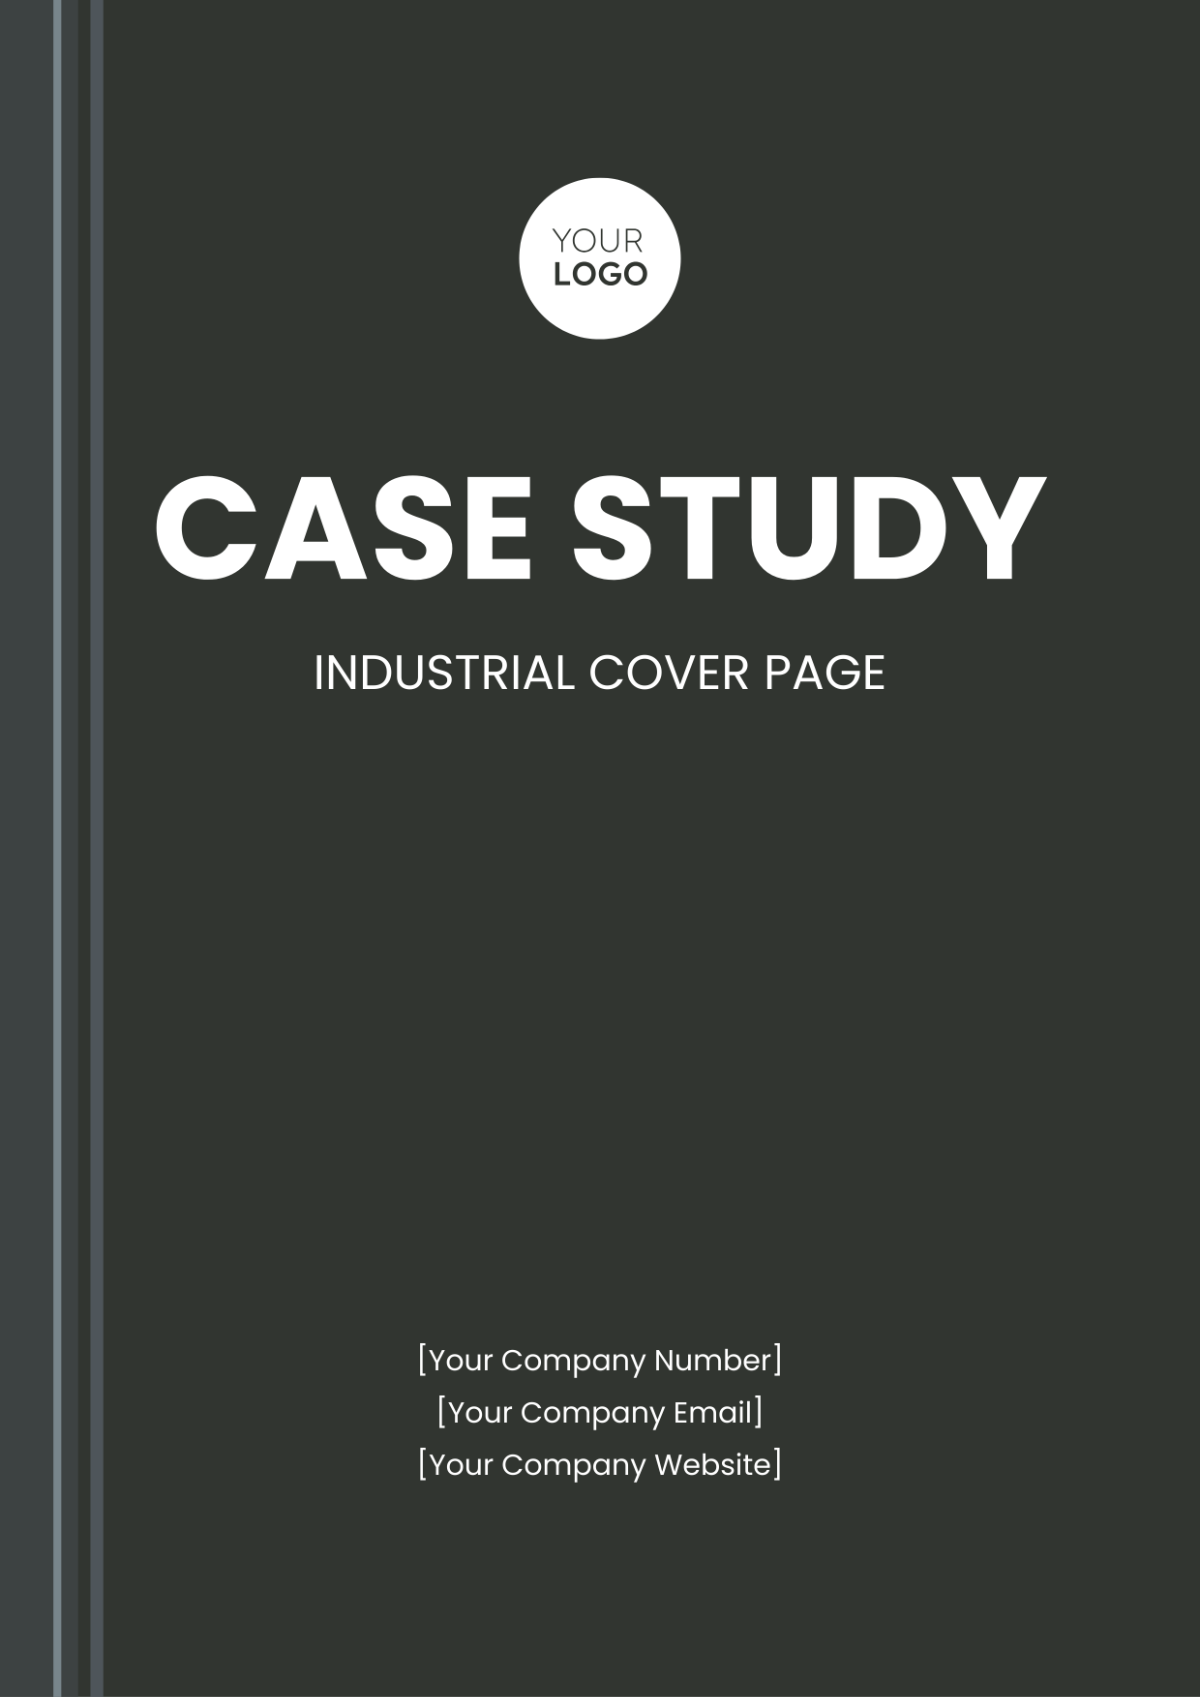 Case Study Institutional Cover Page Template